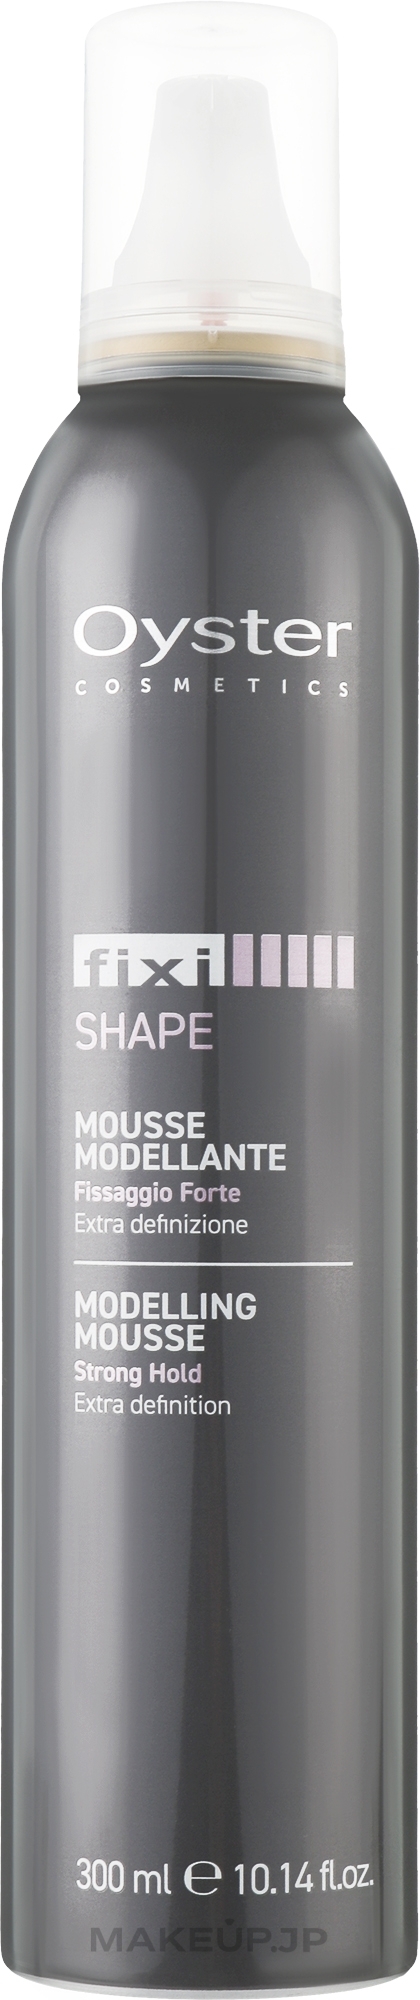 Strong Hold Hair Mousse - Oyster Cosmetics Fixi Mousse Strong — photo 300 ml